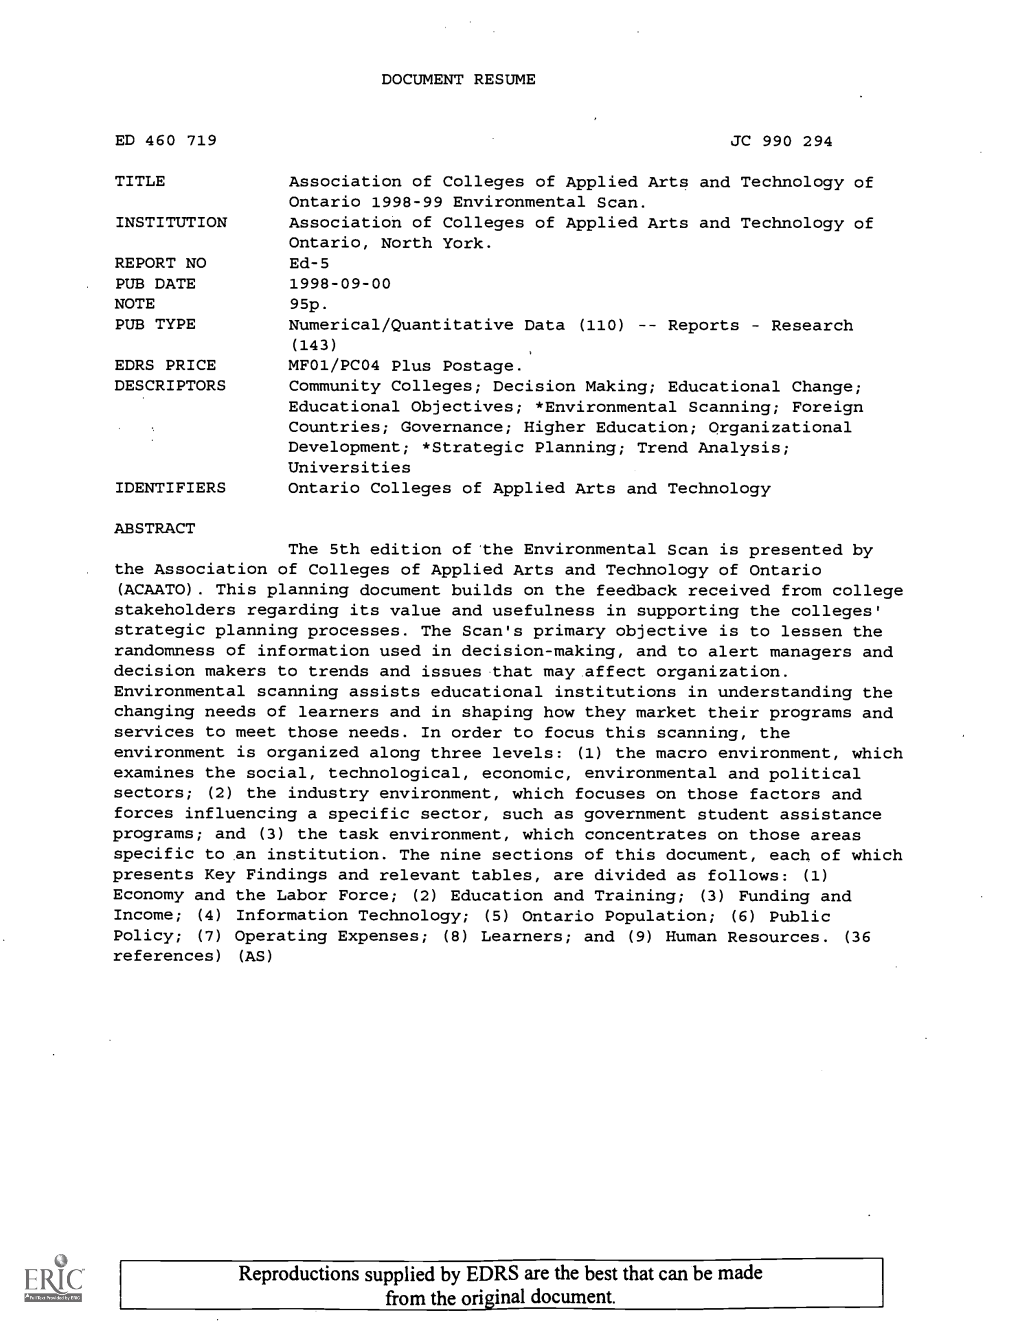 TITLE Association of Colleges of Applied Arts and Technology of Ontario 1998-99 Environmental Scan